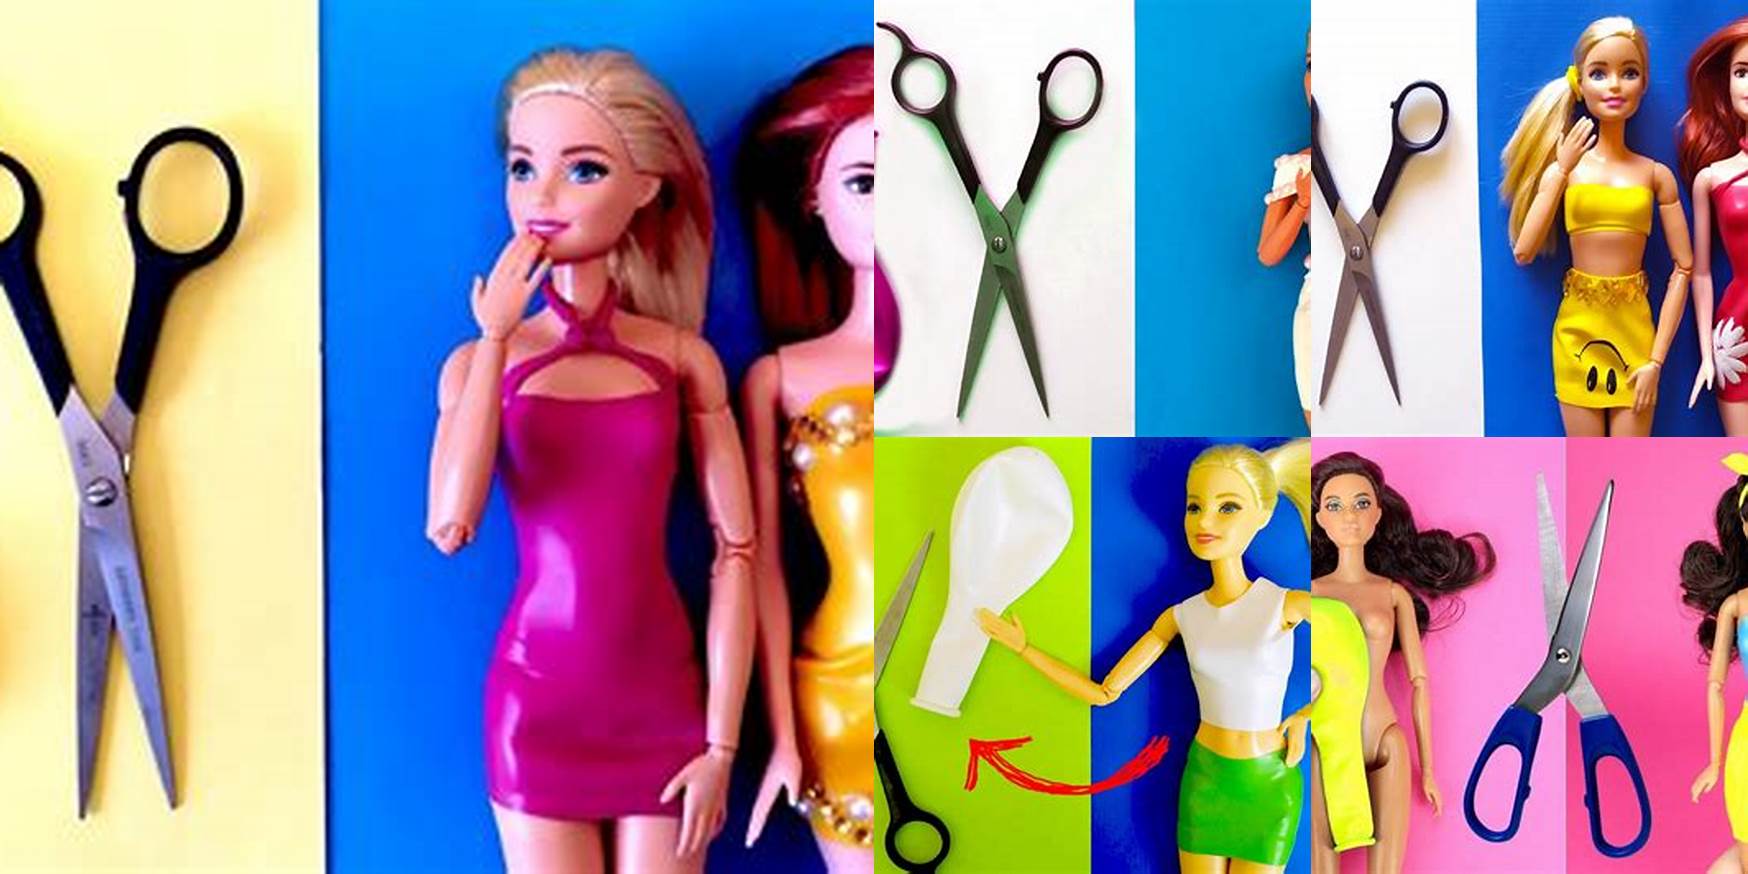 How To Make Doll Clothes Out Of Balloons